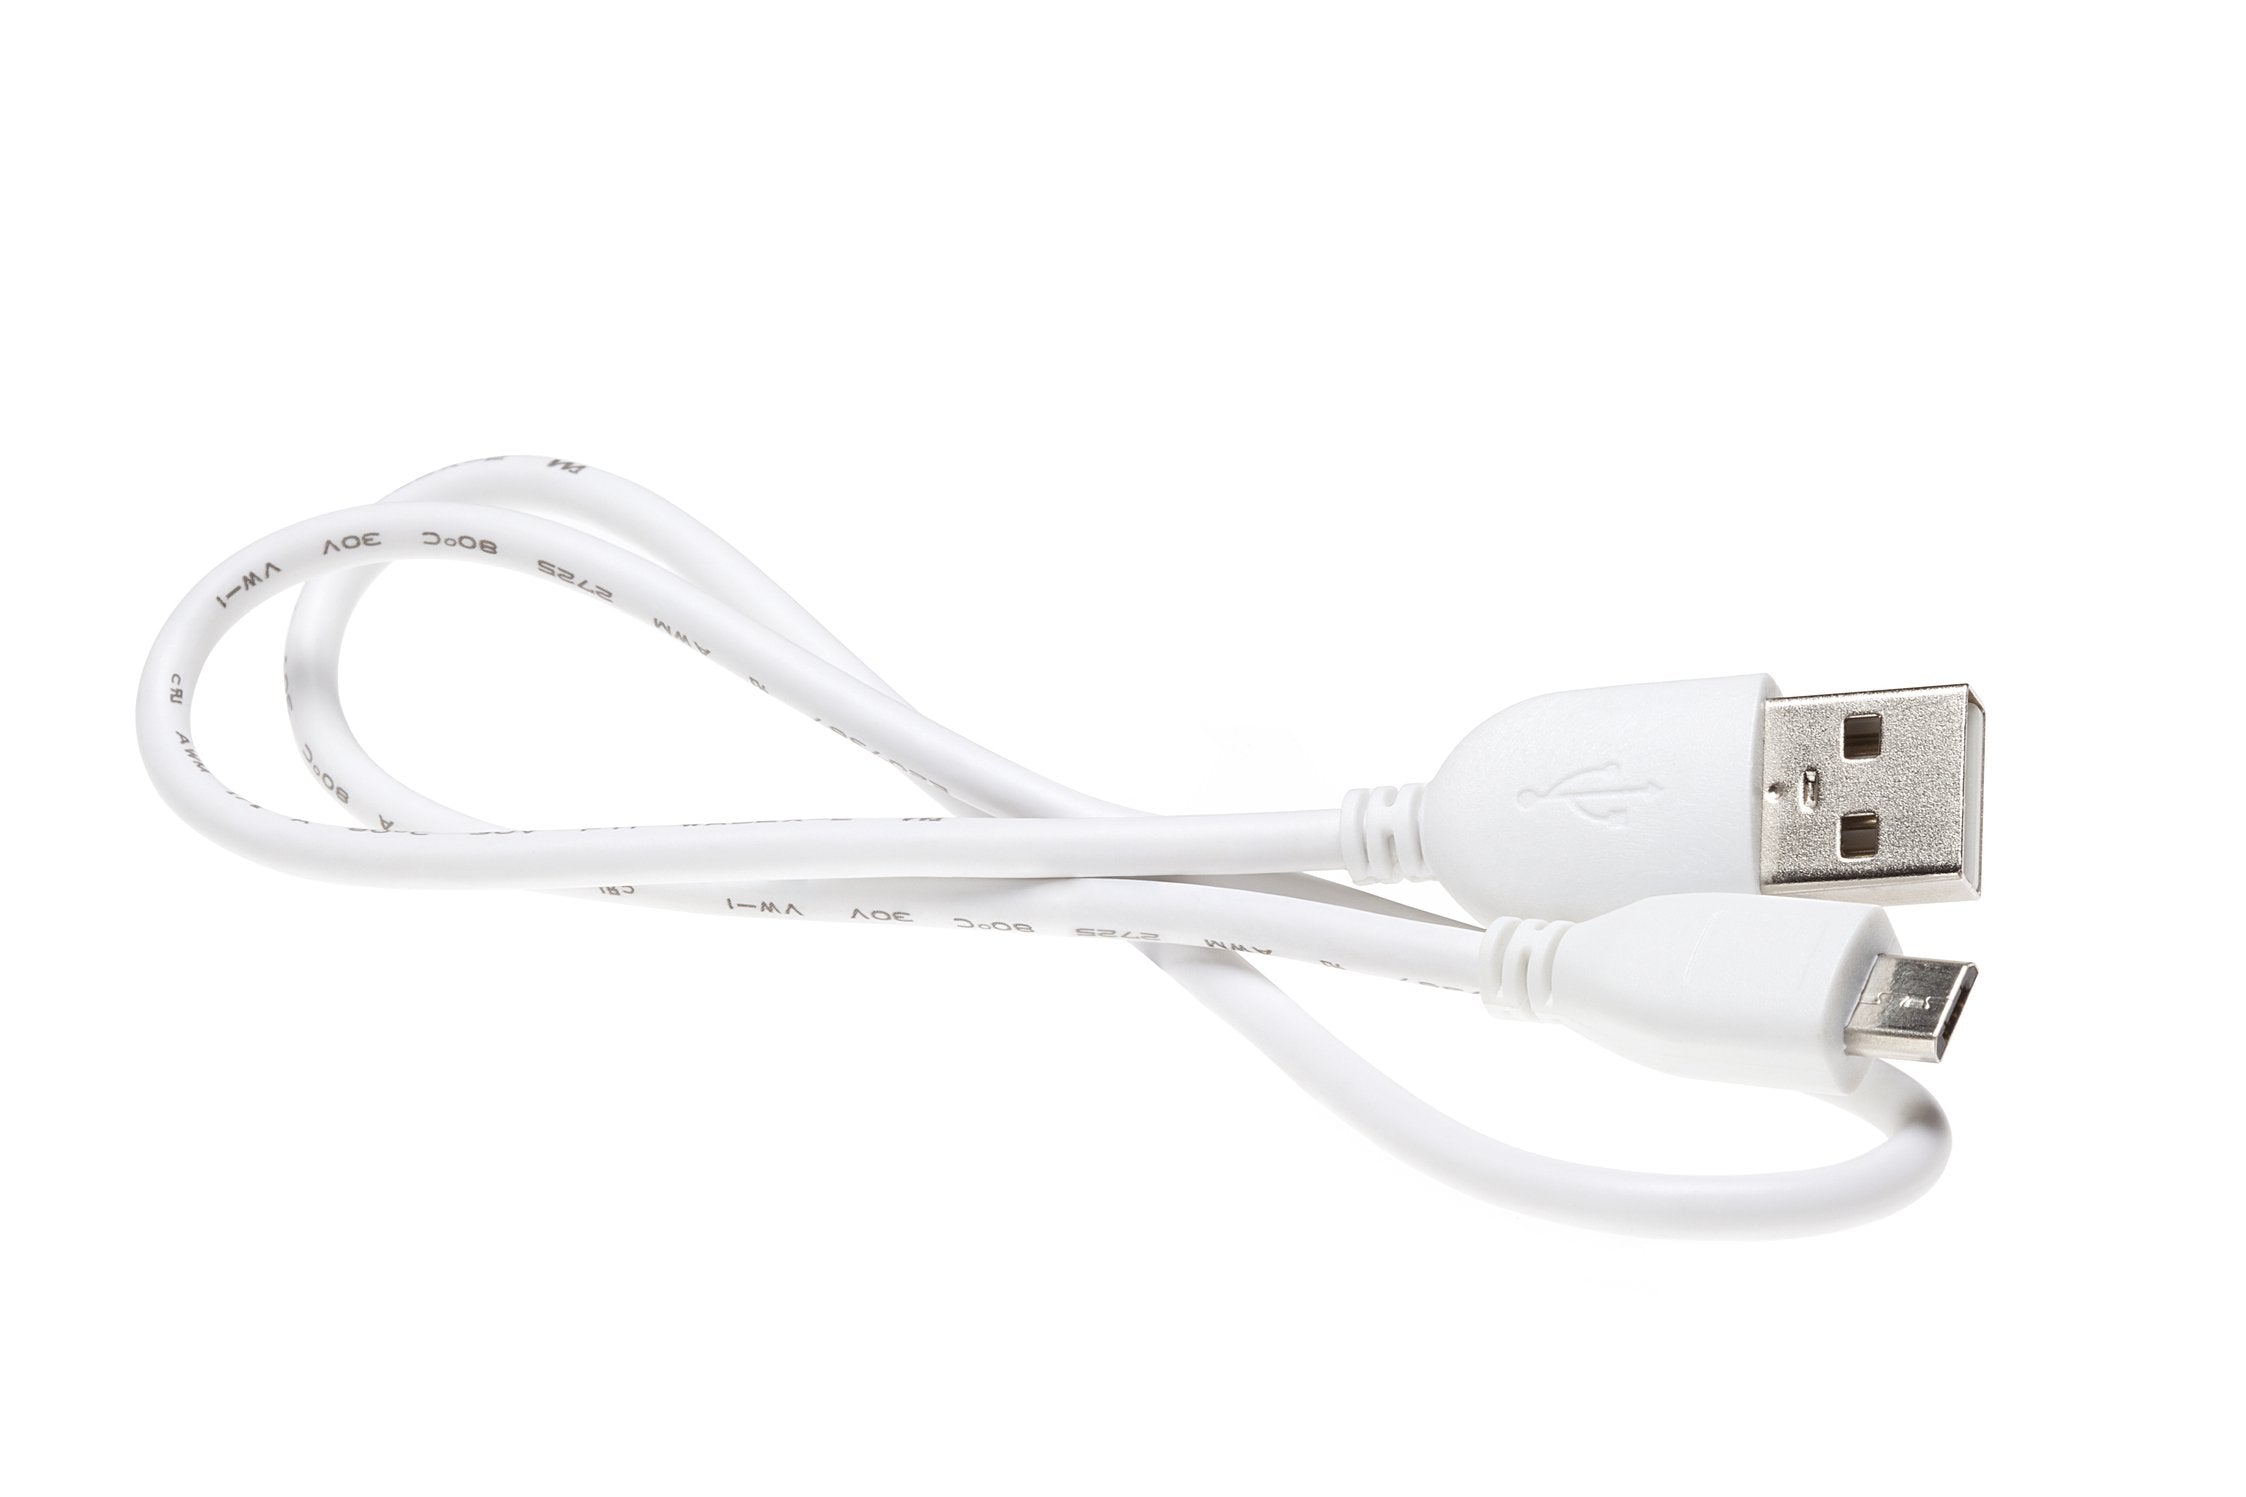 Usb-cable